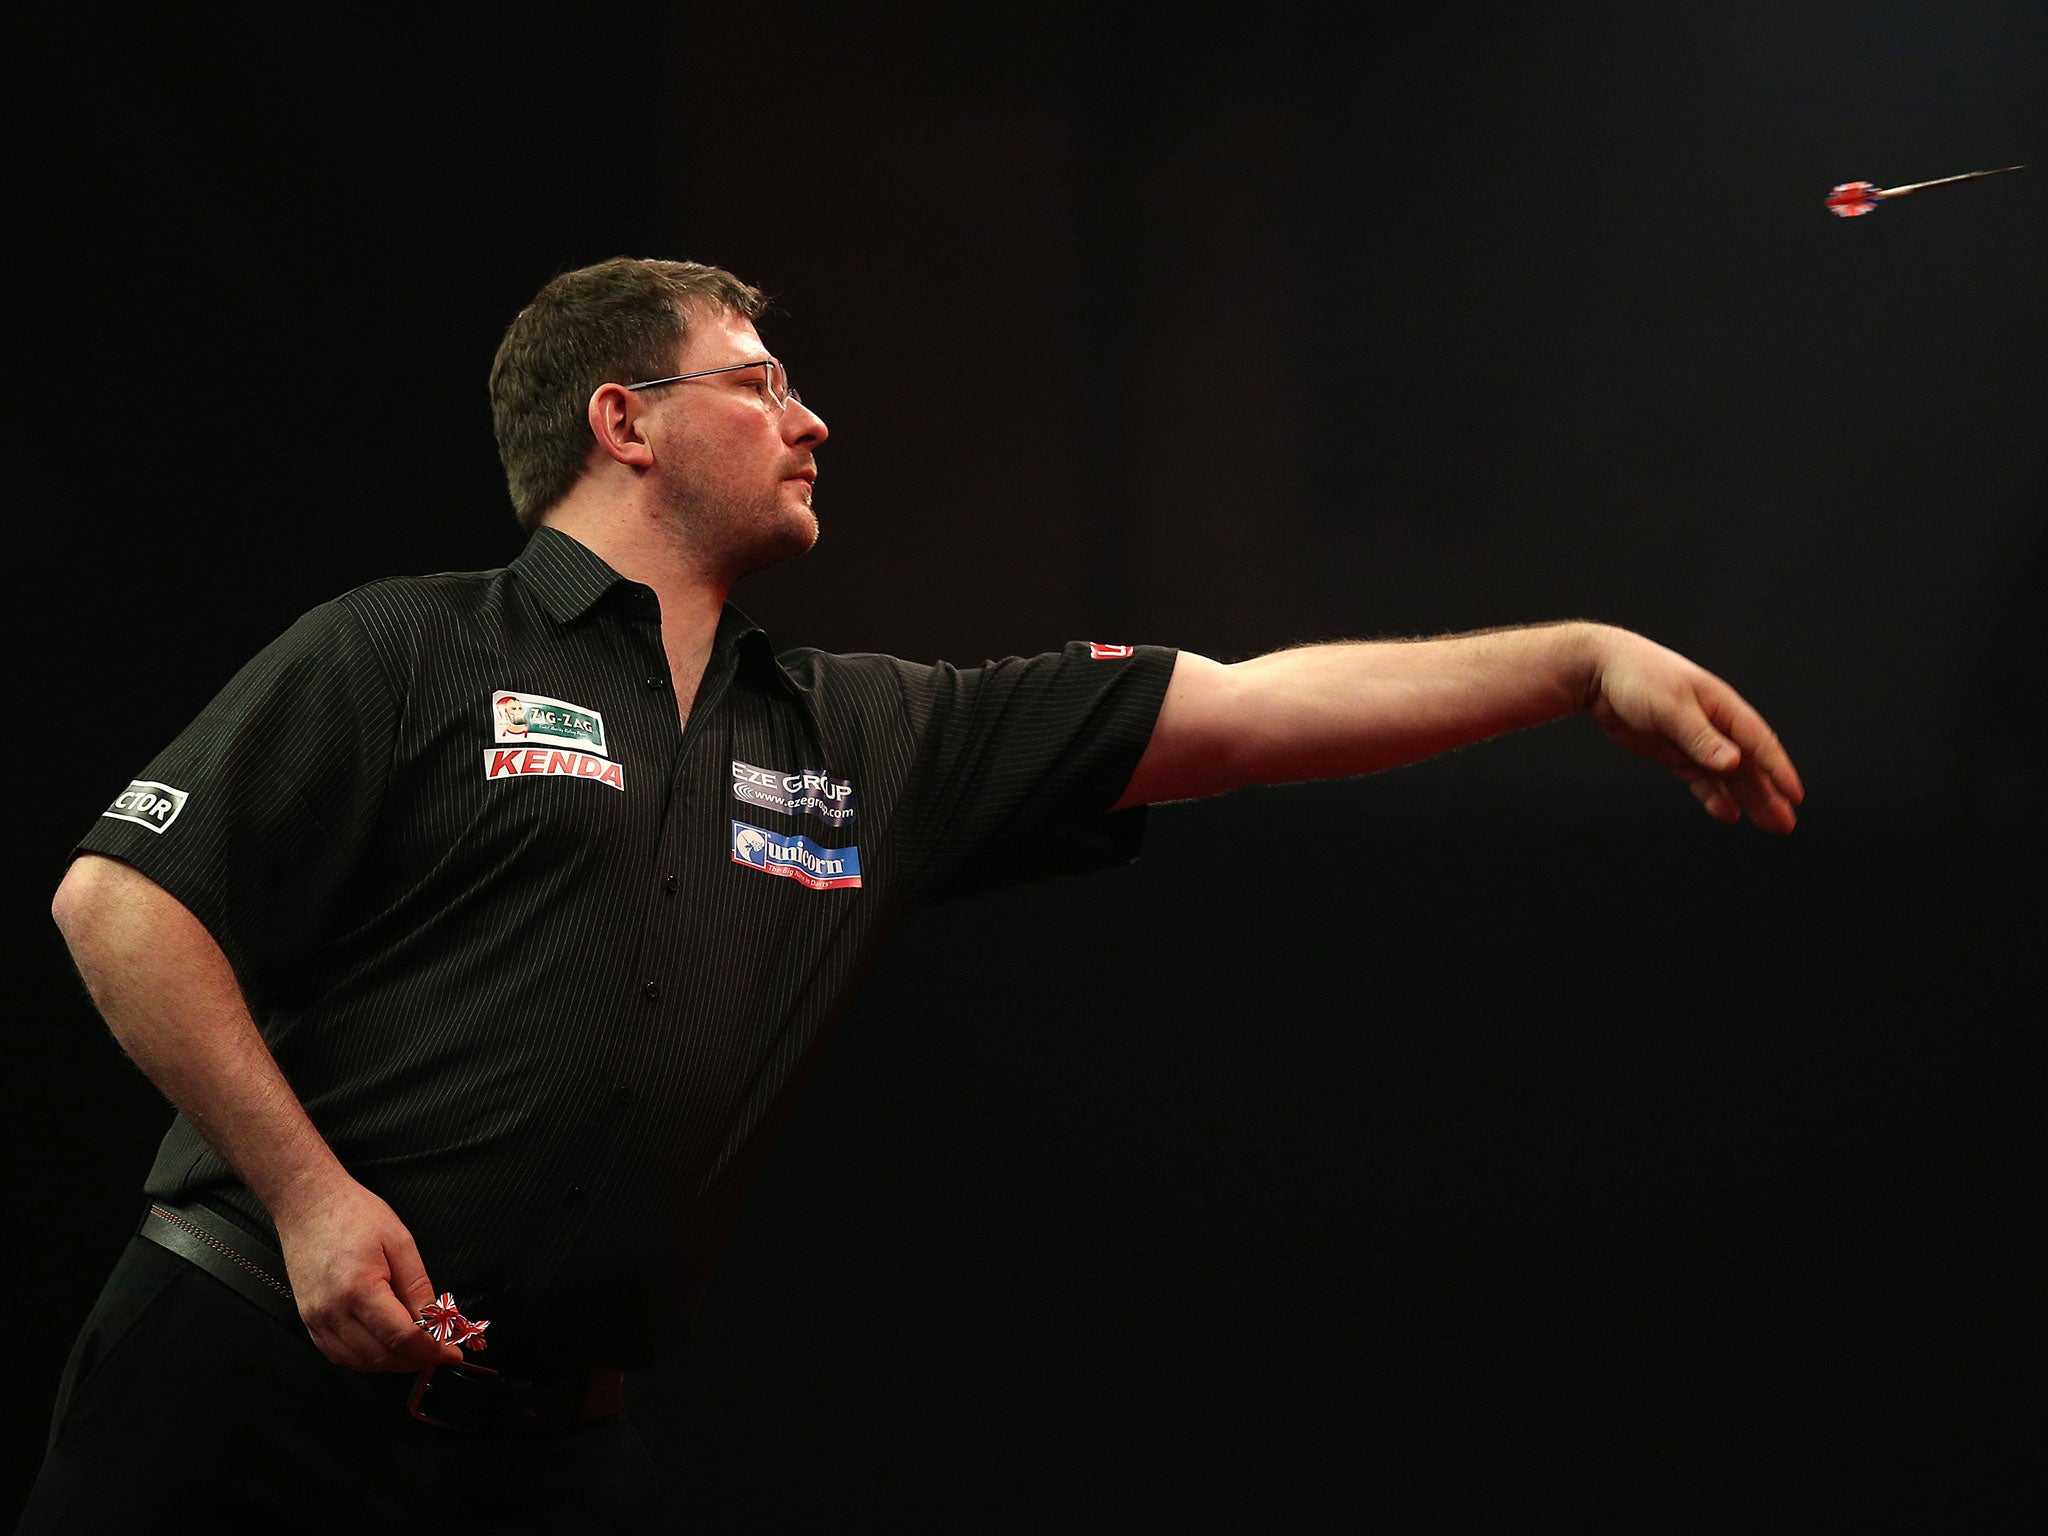 James Wade escaped an early exit at the Darts World Championship, fighting back to beat Darren Webster 3-2 in the first round